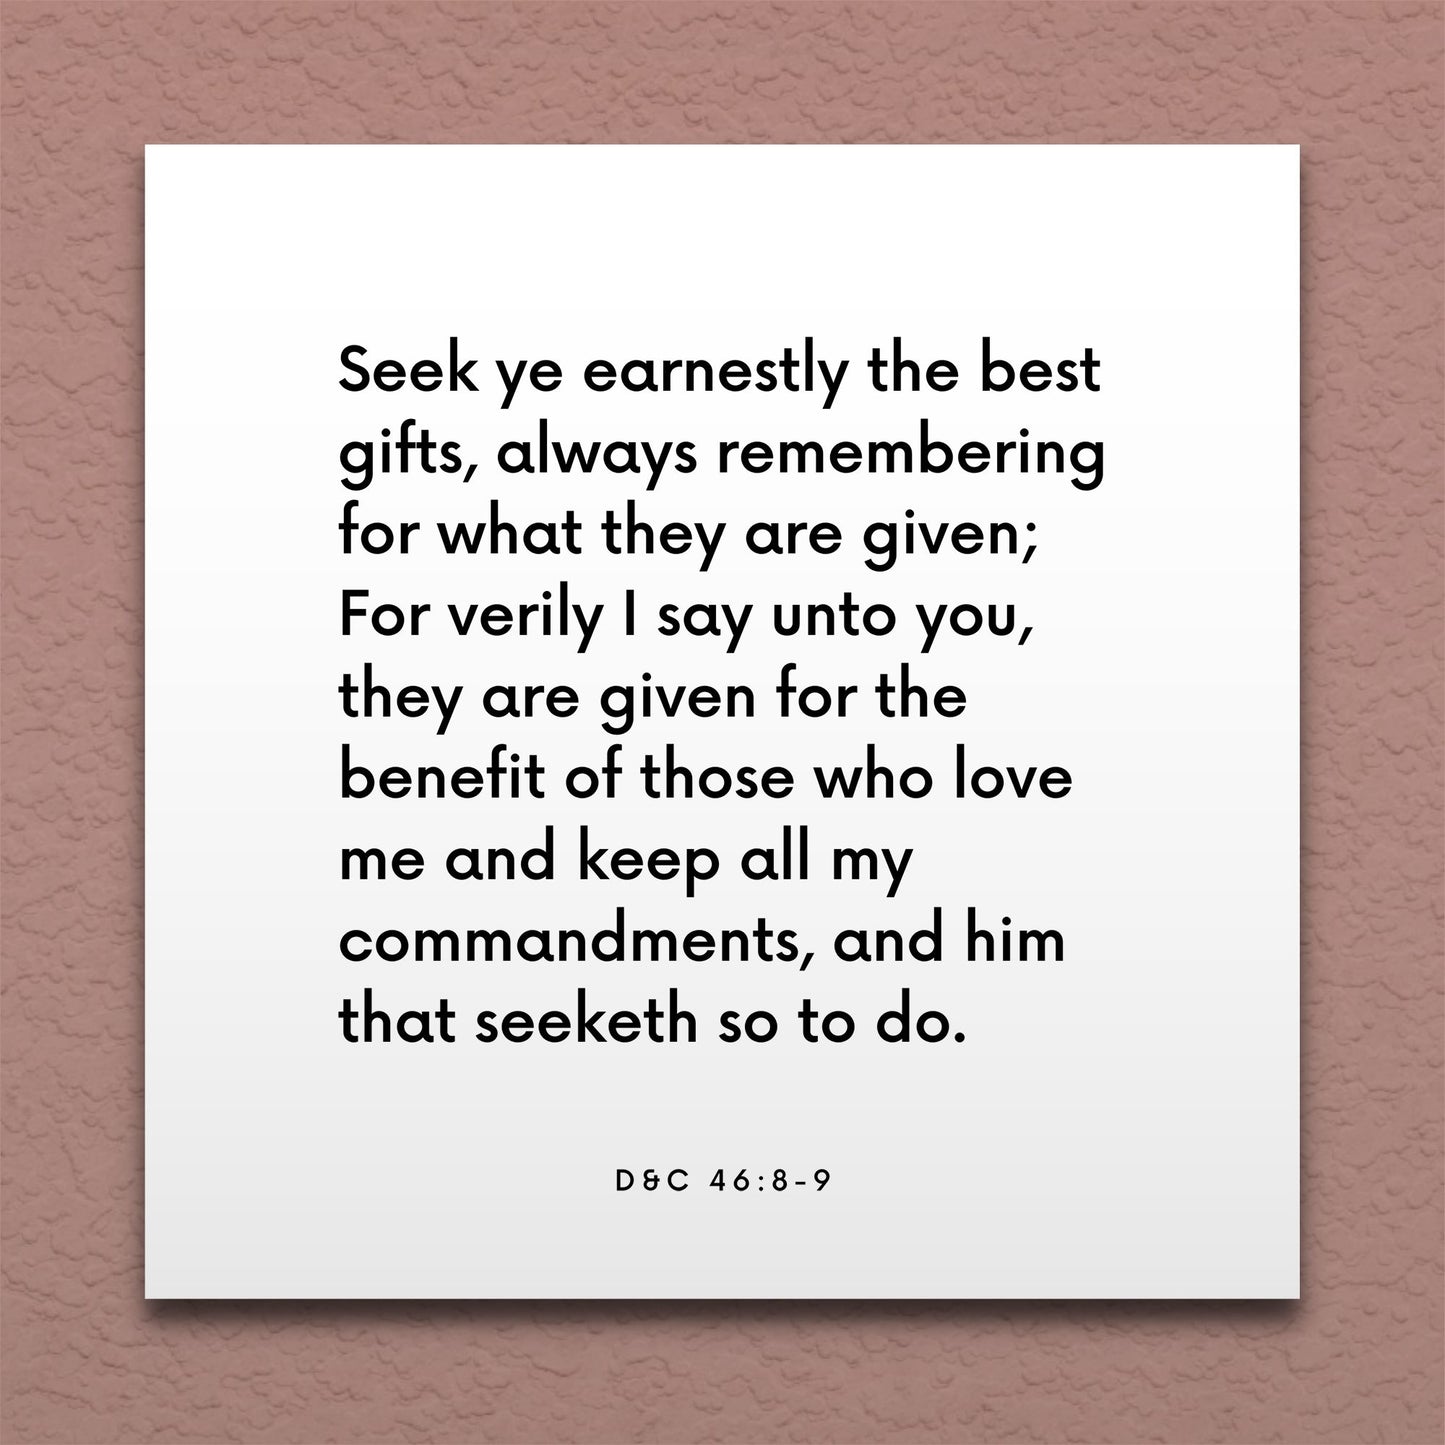 Wall-mounted scripture tile for D&C 46:8-9 - "Seek ye earnestly the best gifts"